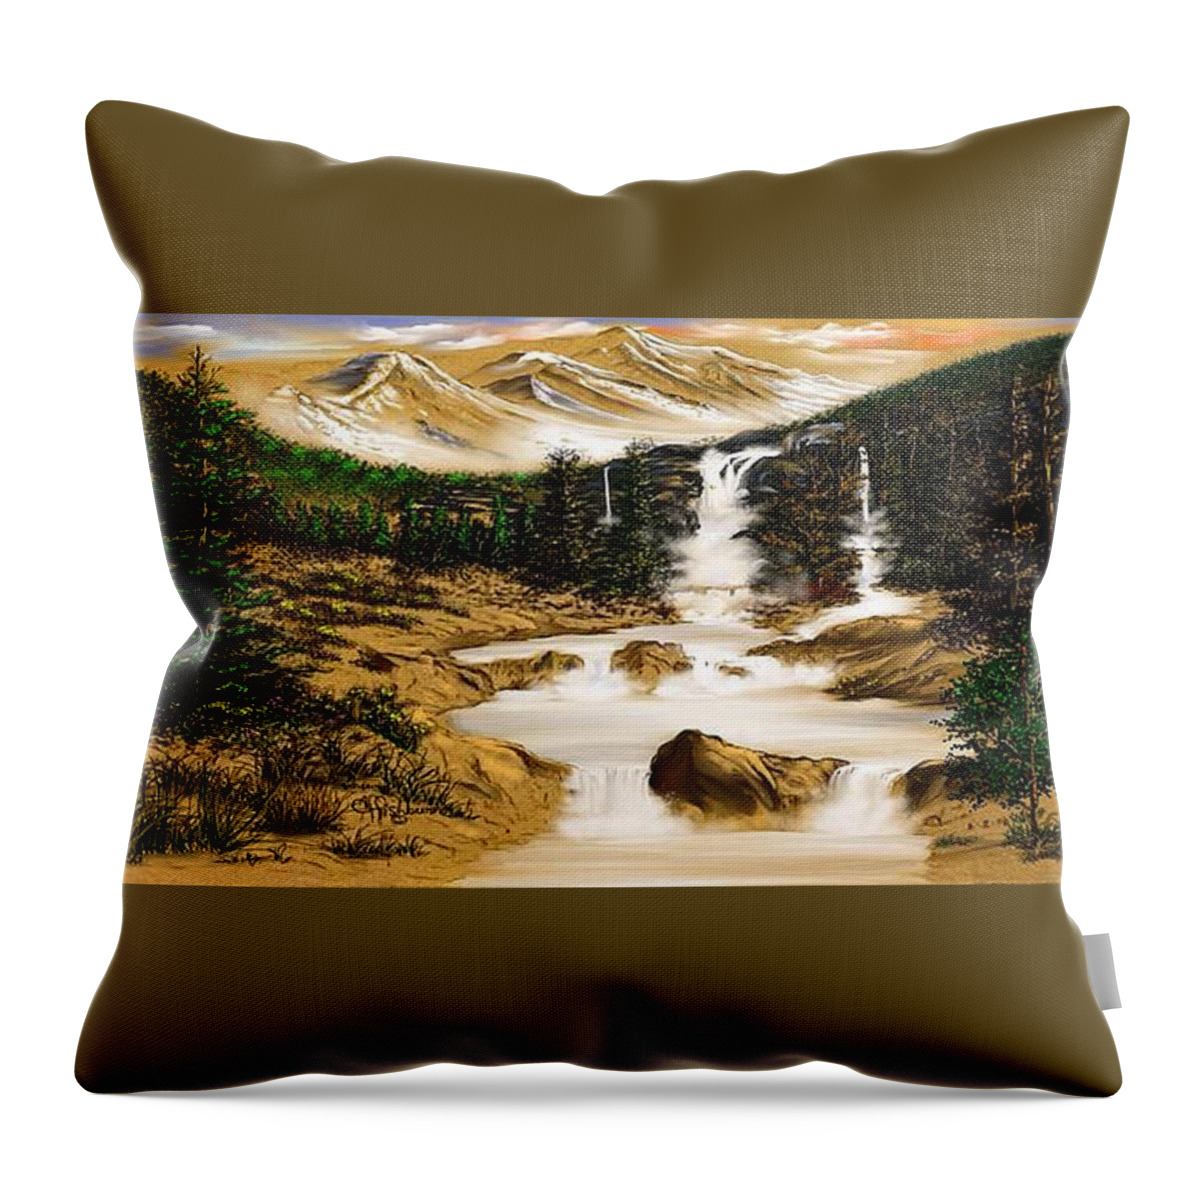 Mountain Scape Throw Pillow featuring the digital art Summer evening glow by Anthony Fishburne